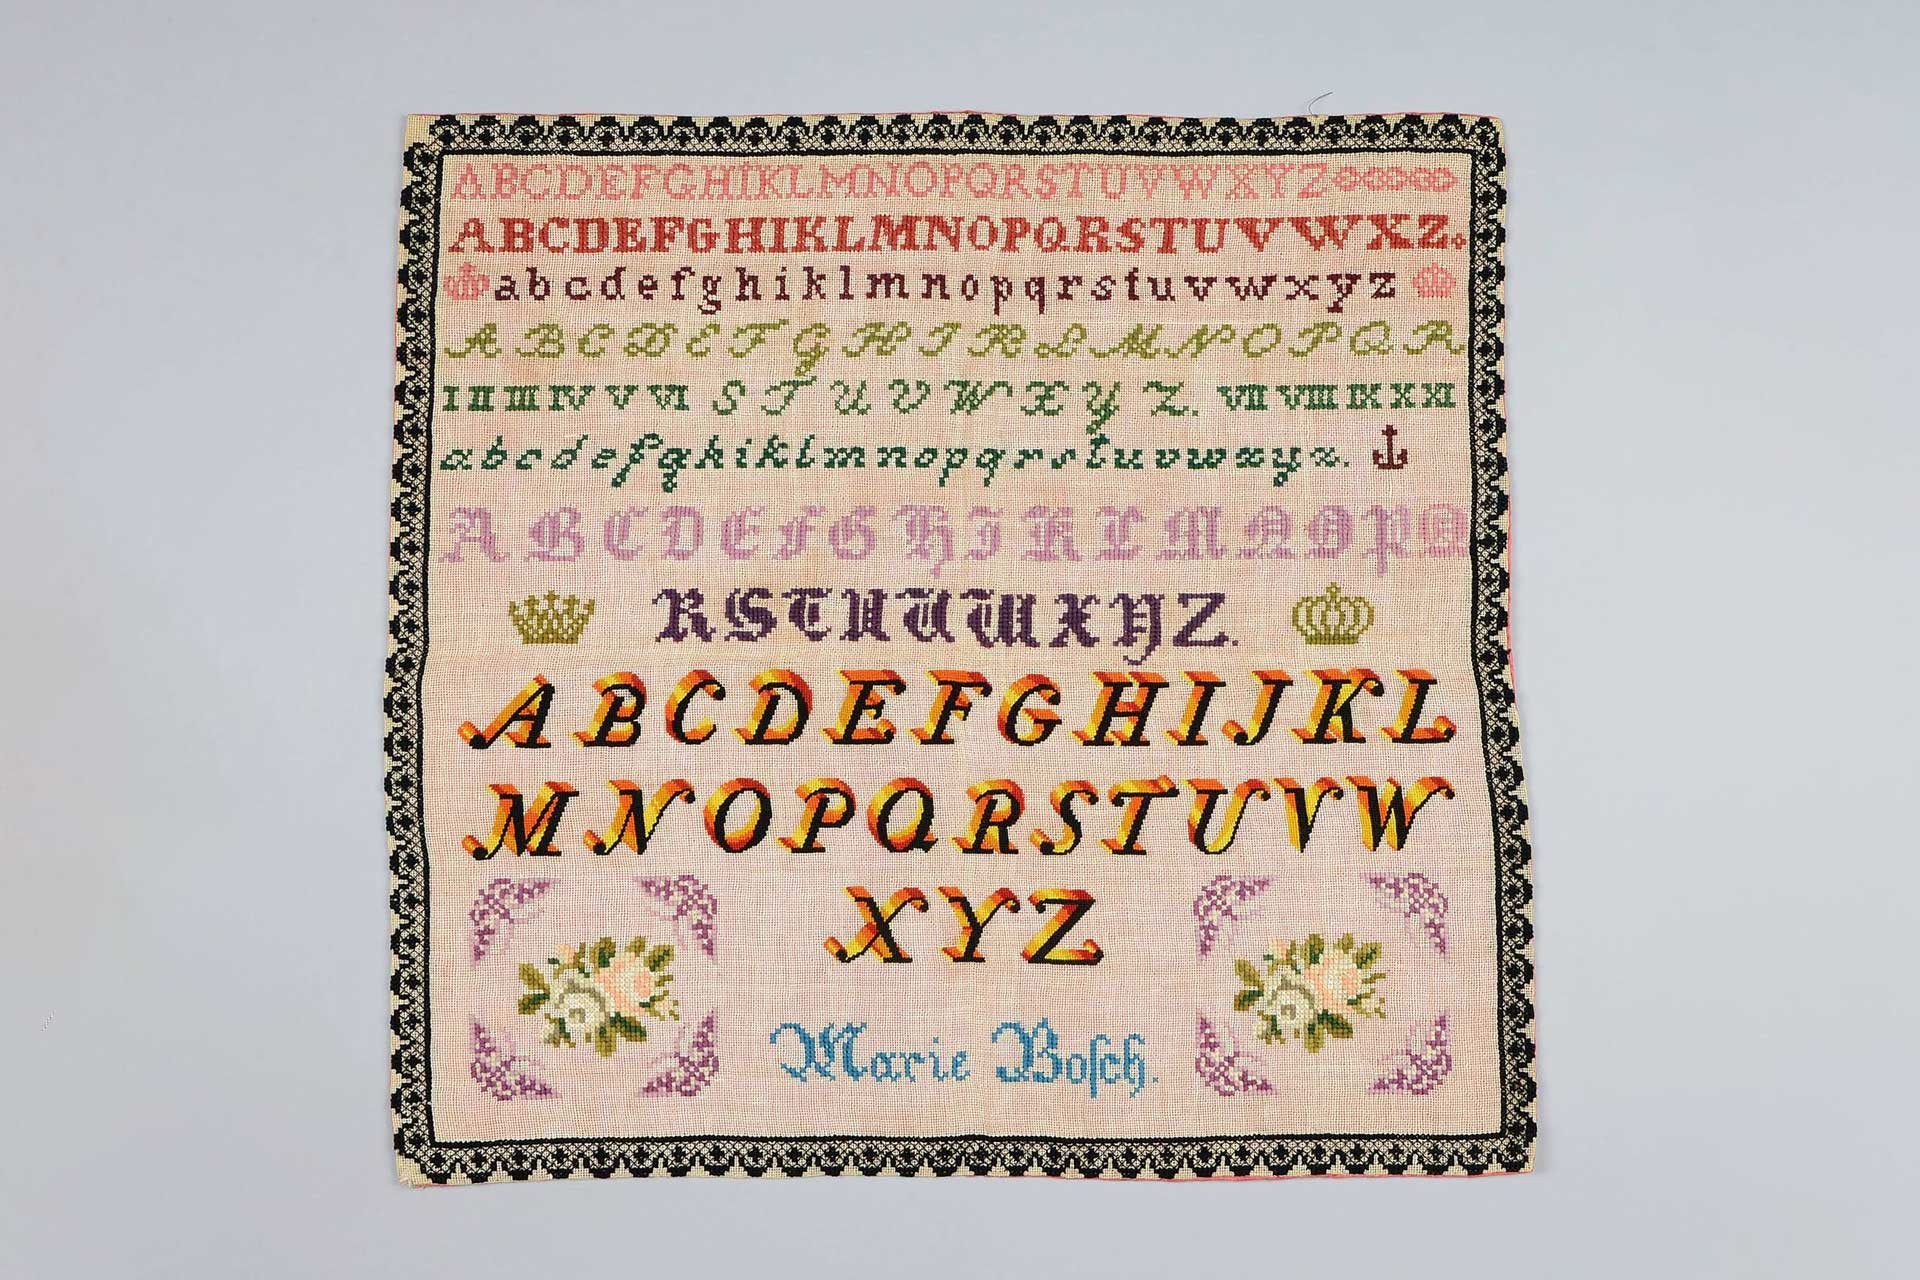 <BODY><div><span style="letter-spacing: 0px;">Marie Bosch, Cloth sampler with polychrome embroidery, 2nd half of the 19th century © MAK/Branislav Djordjevic</span></div><body id="cke_pastebin" style="position: absolute; top: 0px; width: 1px; height: 1px; overflow: hidden; left: -1000px;">Marie Bosch, Cloth sampler with polychrome embroidery, 2nd half of the 19th century © MAK/Branislav Djordjevic</body></BODY>